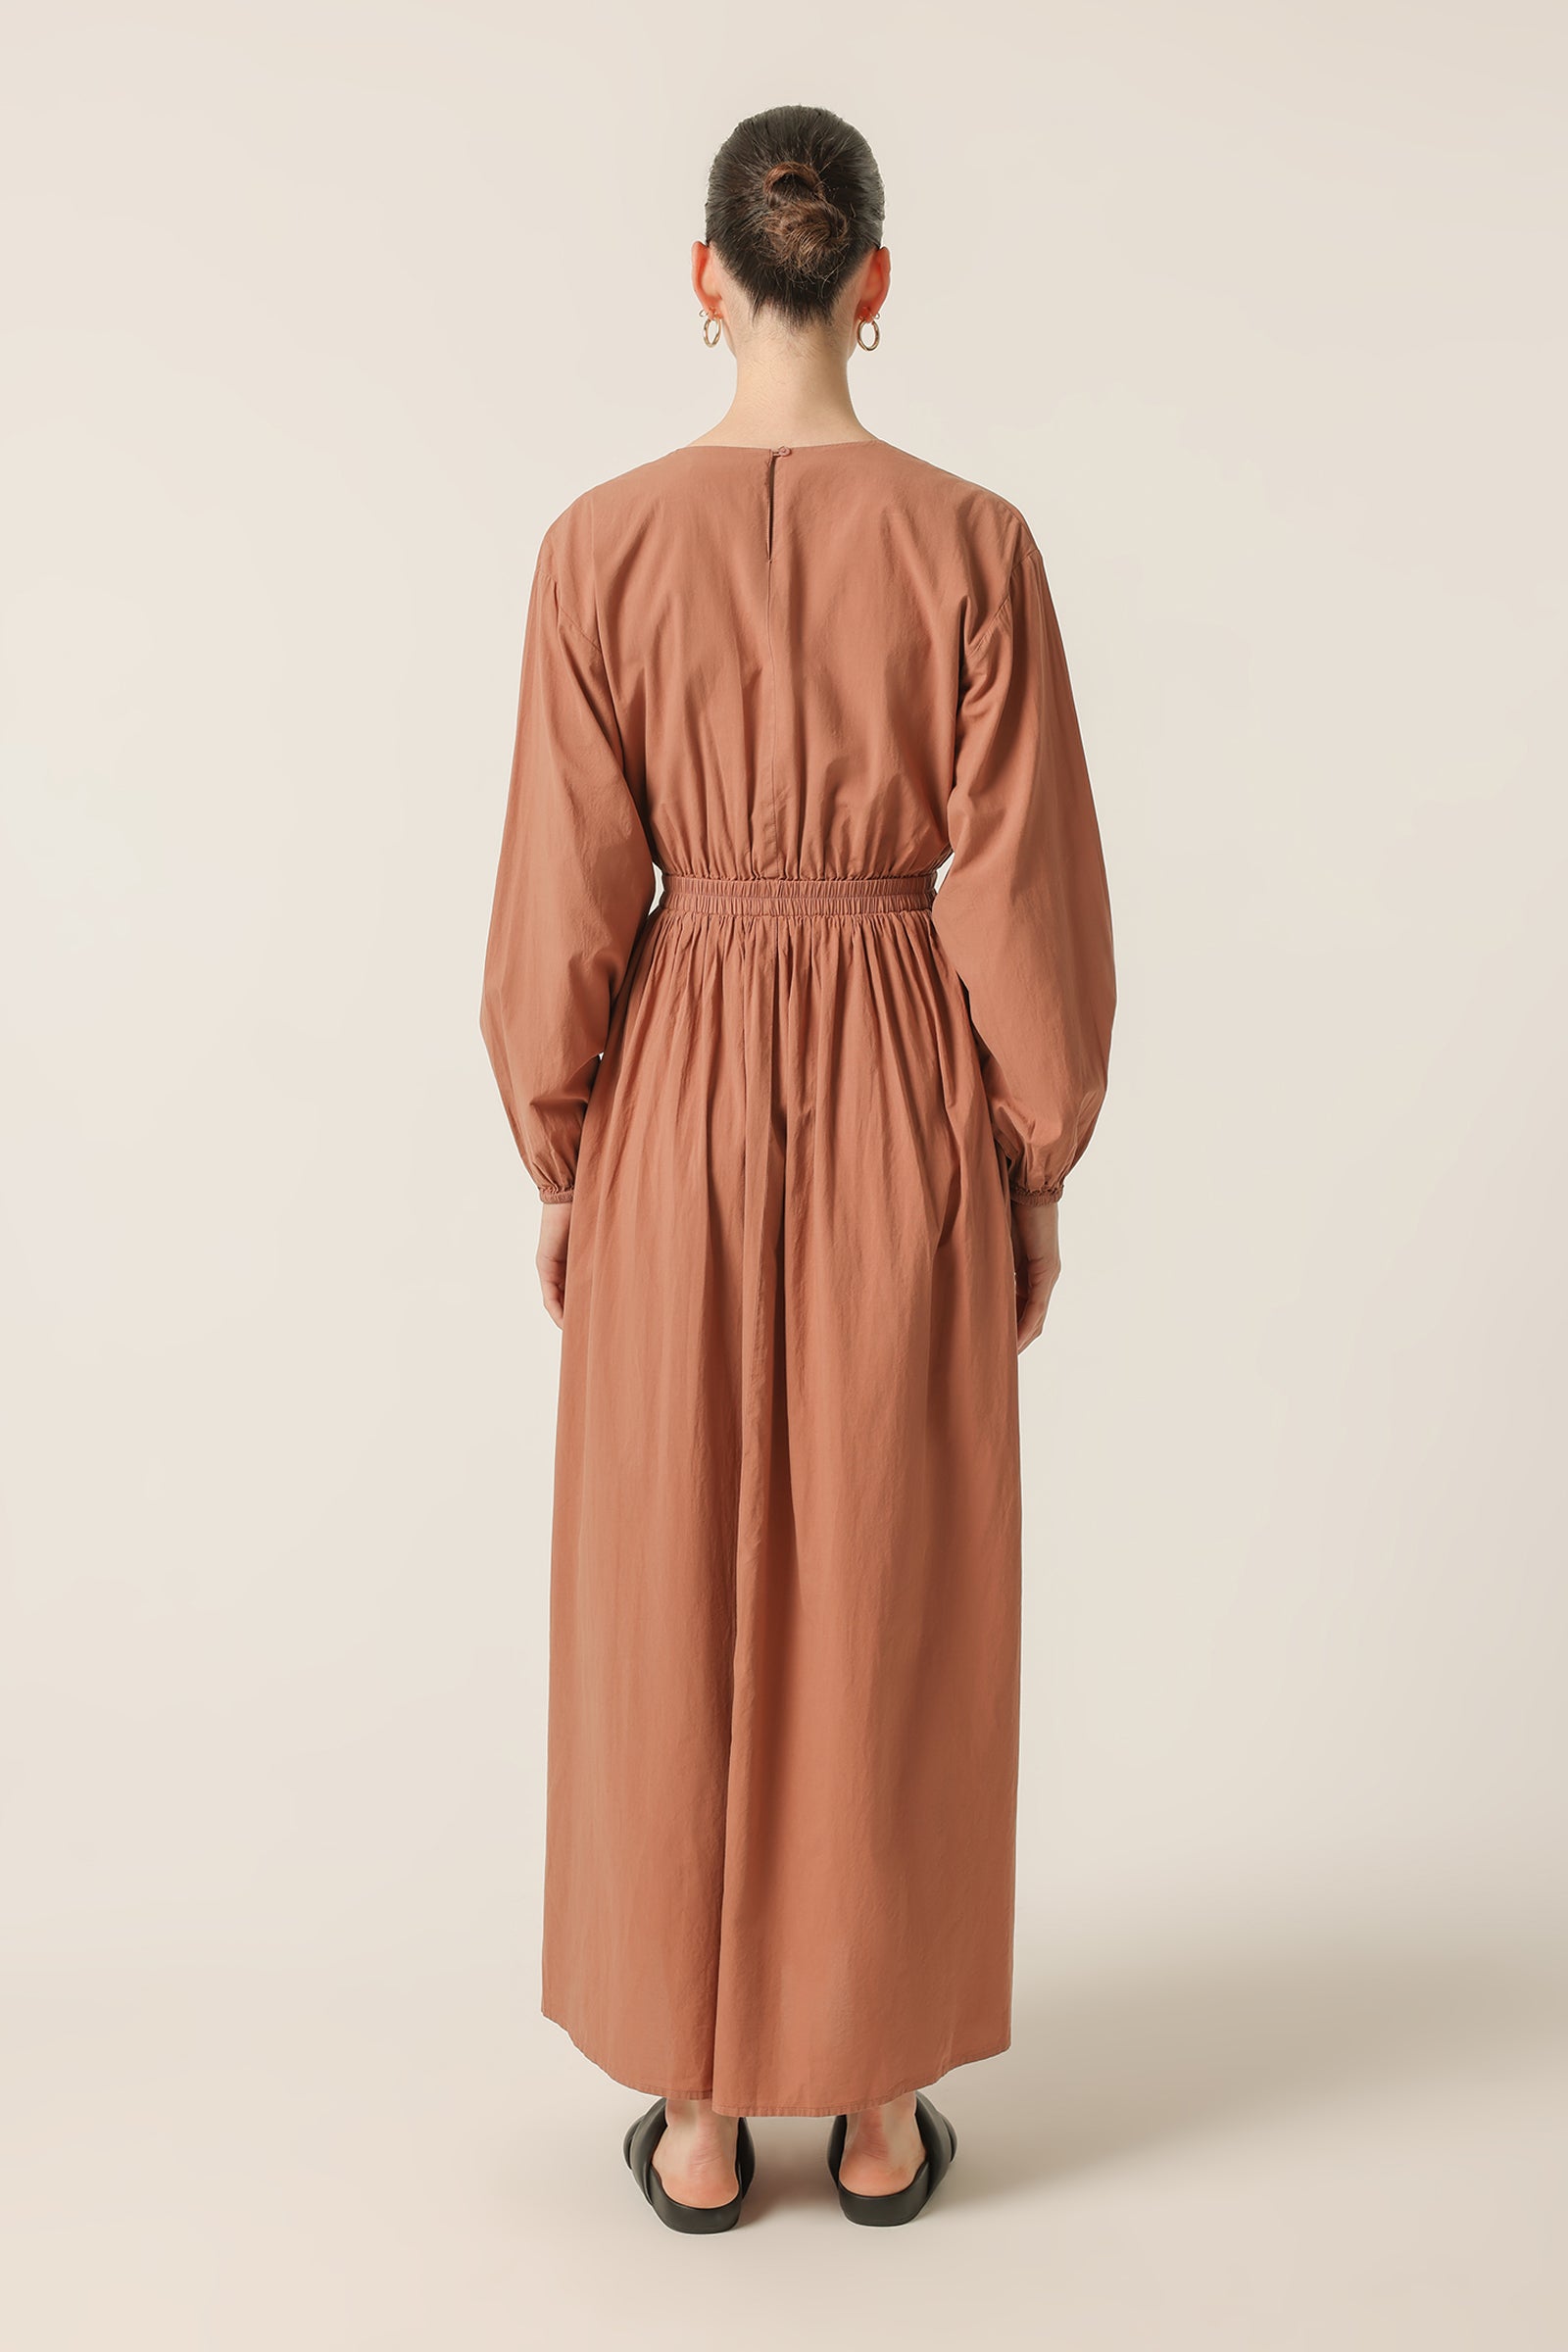 Nude Lucy Hudson Maxi Dress In A Light Brown Brandy Colour 